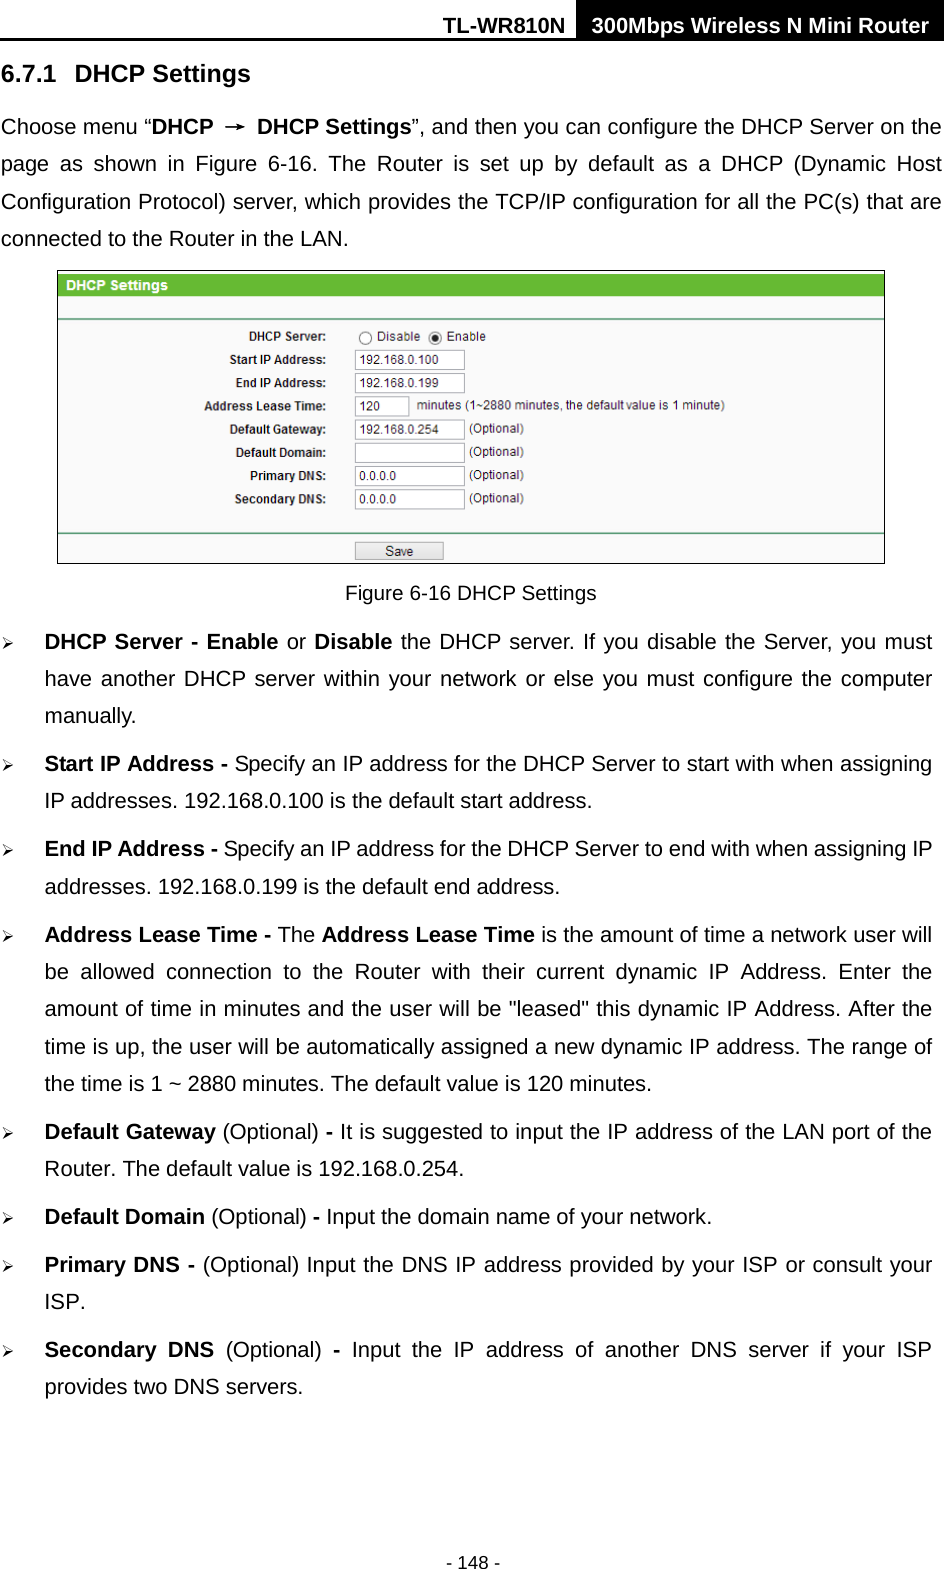 TL-WR810N 300Mbps Wireless N Mini Router  - 148 - 6.7.1 DHCP Settings Choose menu “DHCP → DHCP Settings”, and then you can configure the DHCP Server on the page  as  shown in Figure  6-16.  The  Router is set up by default as a DHCP (Dynamic Host Configuration Protocol) server, which provides the TCP/IP configuration for all the PC(s) that are connected to the Router in the LAN.    Figure 6-16 DHCP Settings  DHCP Server - Enable or Disable the DHCP server. If you disable the Server, you must have another DHCP server within your network or else you must configure the computer manually.  Start IP Address - Specify an IP address for the DHCP Server to start with when assigning IP addresses. 192.168.0.100 is the default start address.  End IP Address - Specify an IP address for the DHCP Server to end with when assigning IP addresses. 192.168.0.199 is the default end address.  Address Lease Time - The Address Lease Time is the amount of time a network user will be allowed connection to the Router with their current dynamic IP Address. Enter the amount of time in minutes and the user will be &quot;leased&quot; this dynamic IP Address. After the time is up, the user will be automatically assigned a new dynamic IP address. The range of the time is 1 ~ 2880 minutes. The default value is 120 minutes.  Default Gateway (Optional) - It is suggested to input the IP address of the LAN port of the Router. The default value is 192.168.0.254.  Default Domain (Optional) - Input the domain name of your network.  Primary DNS - (Optional) Input the DNS IP address provided by your ISP or consult your ISP.  Secondary DNS (Optional)  -  Input the IP address of another DNS server if your ISP provides two DNS servers. 